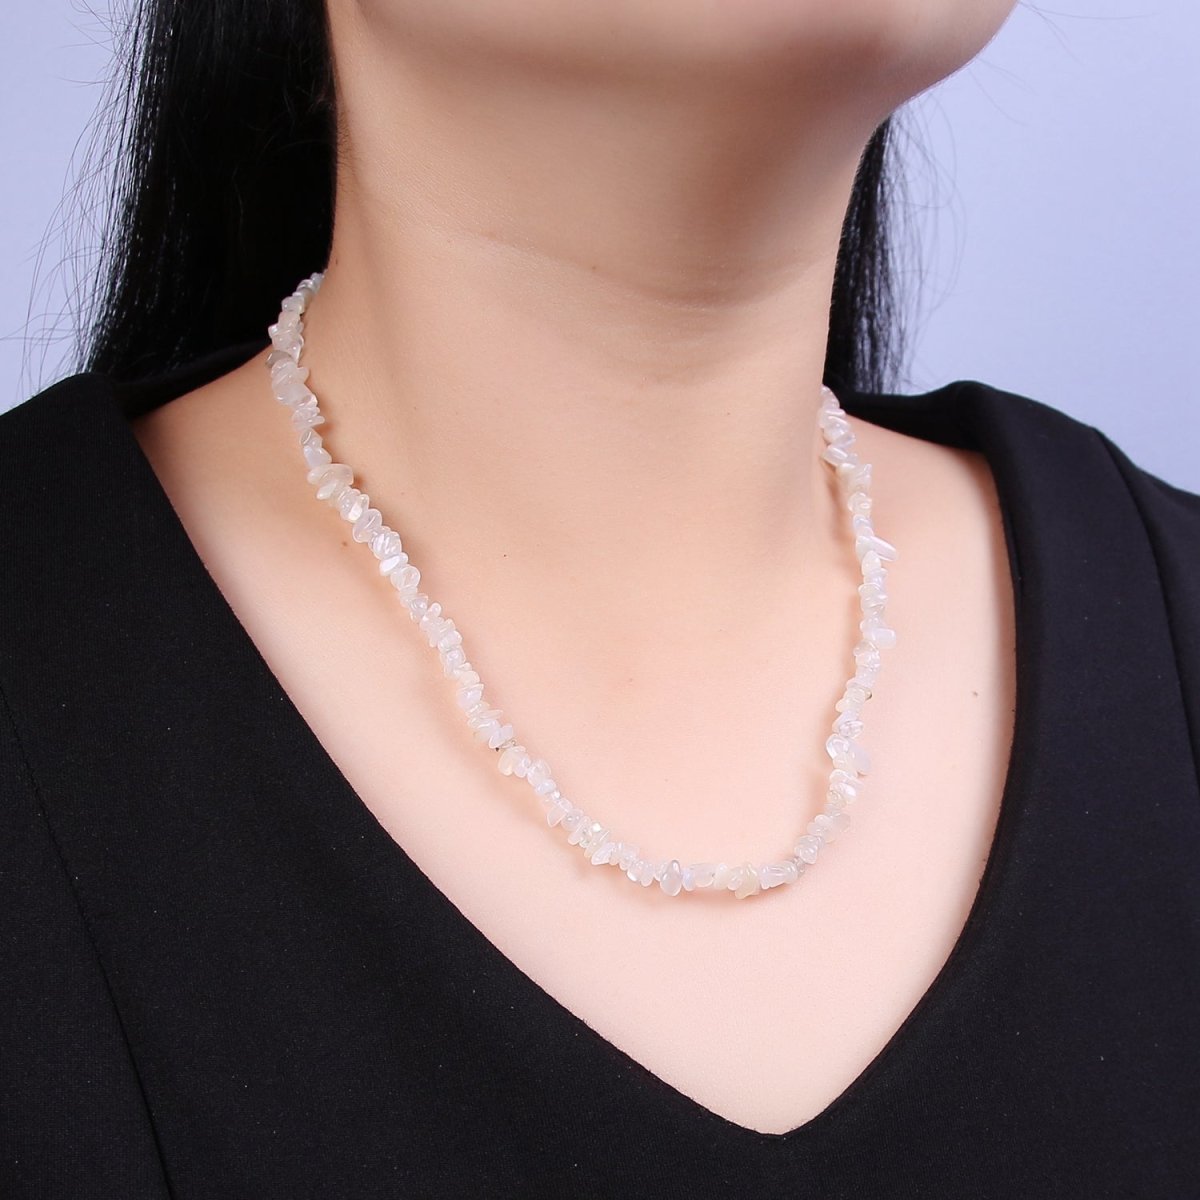 18 Inch Natural Genuine White Moonstone Gemstones Bead Necklace with 2" Extender | WA-633 Clearance Pricing - DLUXCA